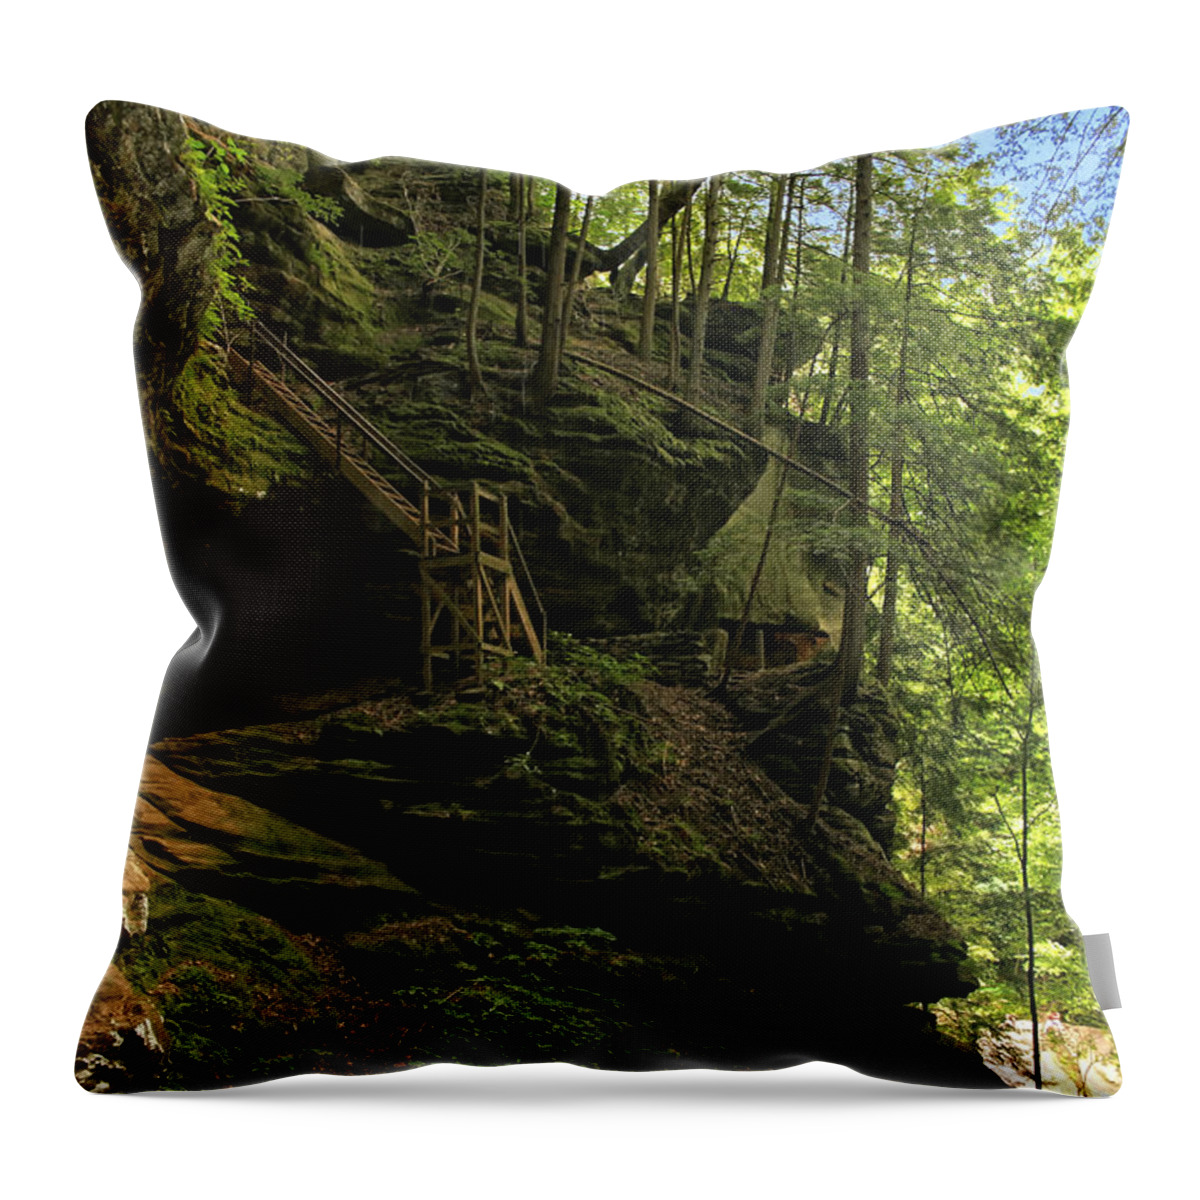 Steps Throw Pillow featuring the photograph Steps On The Rocks by Richard Gregurich